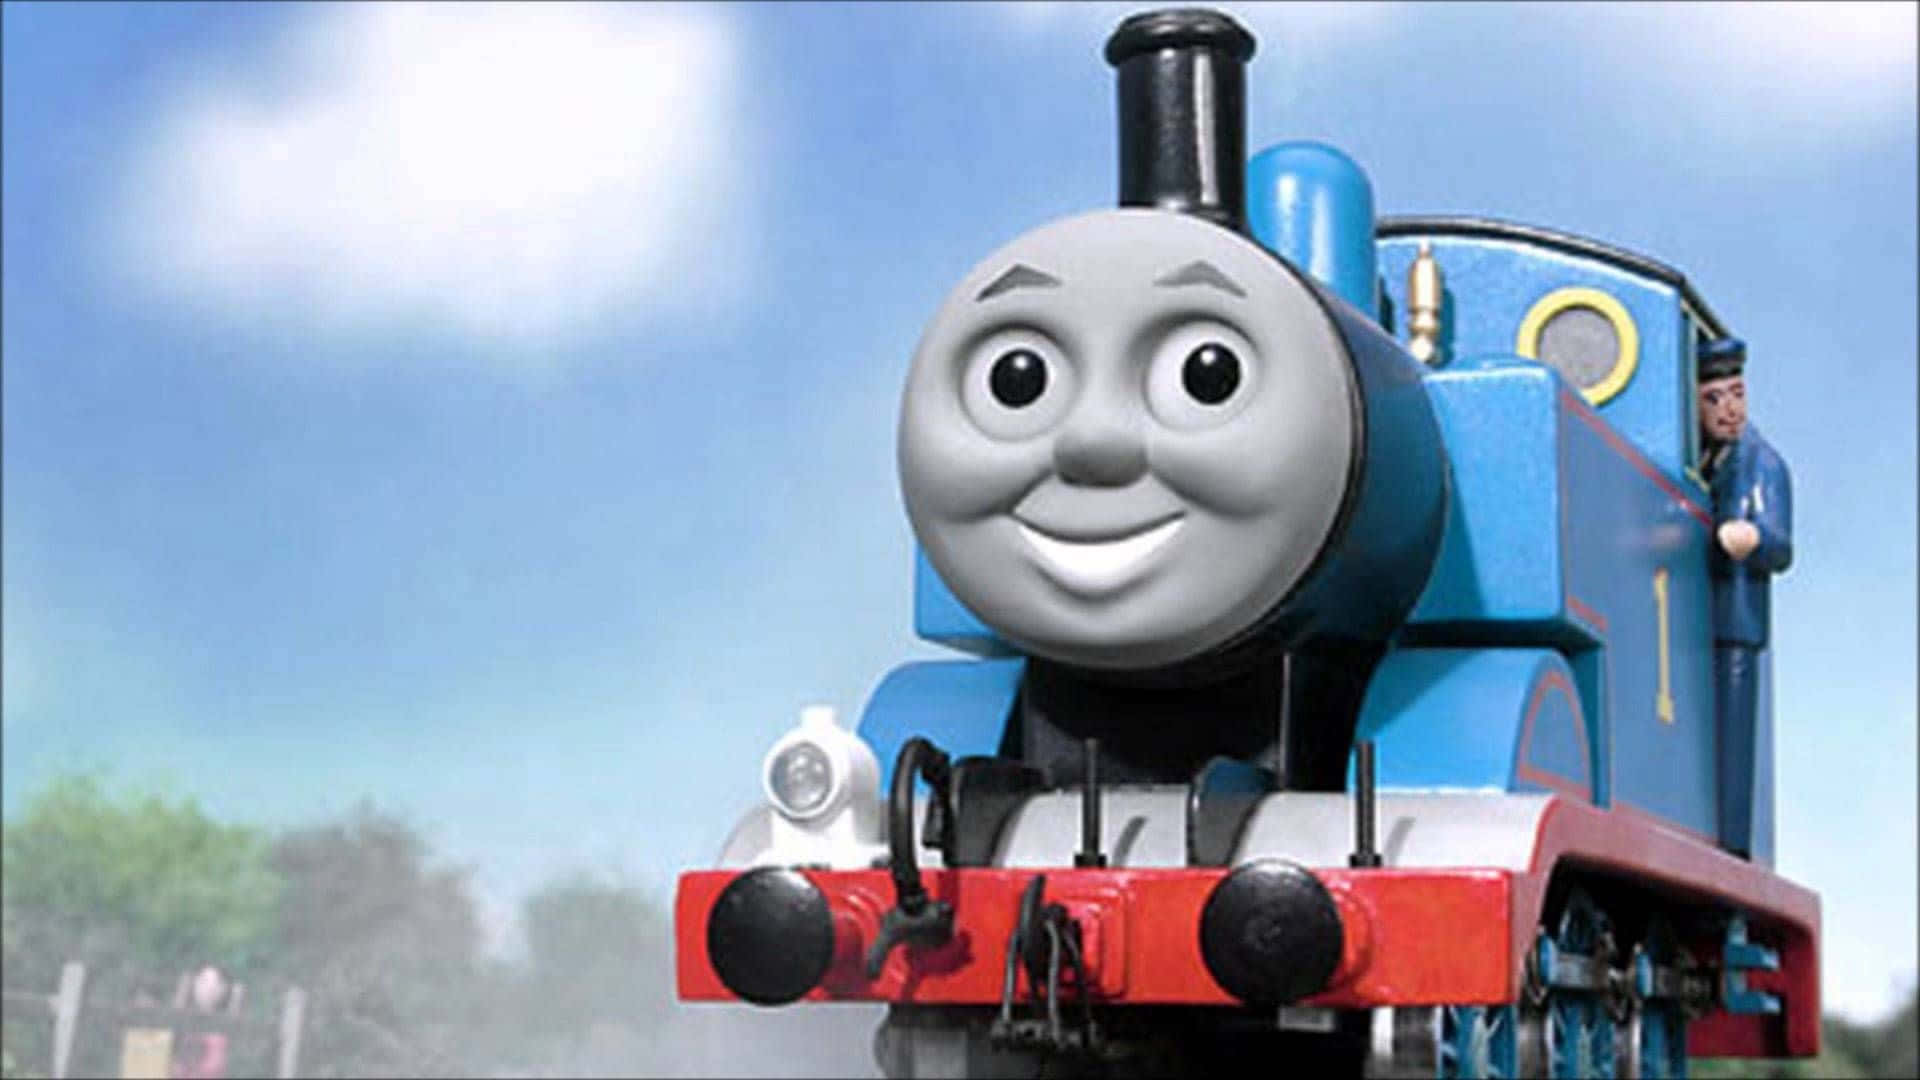 Thomas And Friends Surrounded By Smoke Wallpaper